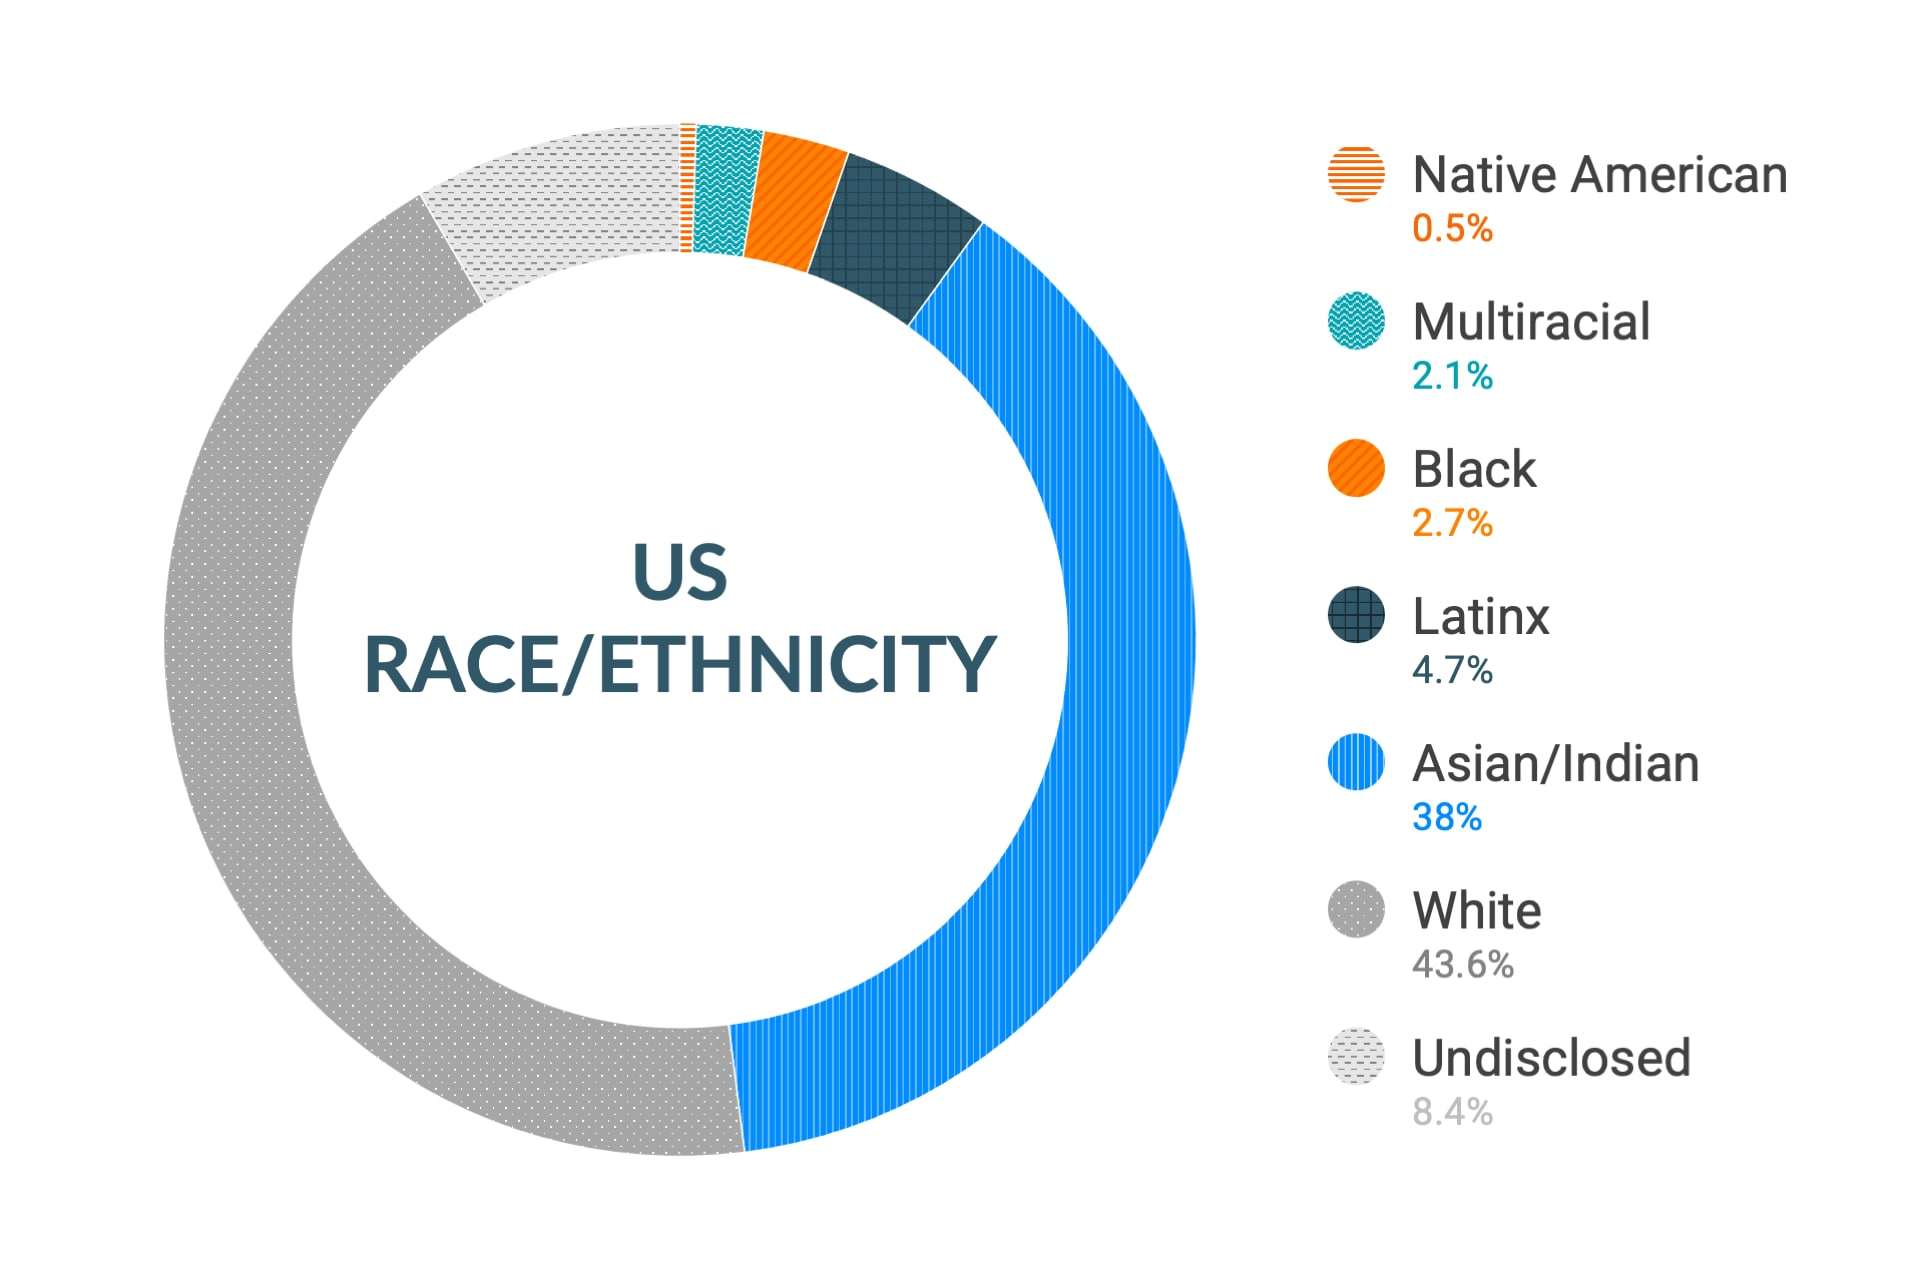 Cloudera Diversity and Inclusion data for U.S. Race and Ethnicity: Native American 0.5%, Multiracial 2.2%, Black 2.8%, Latinx 4.9%, Asian and Indian 36.4%, White 44.6%, Undisclosed 8.4%